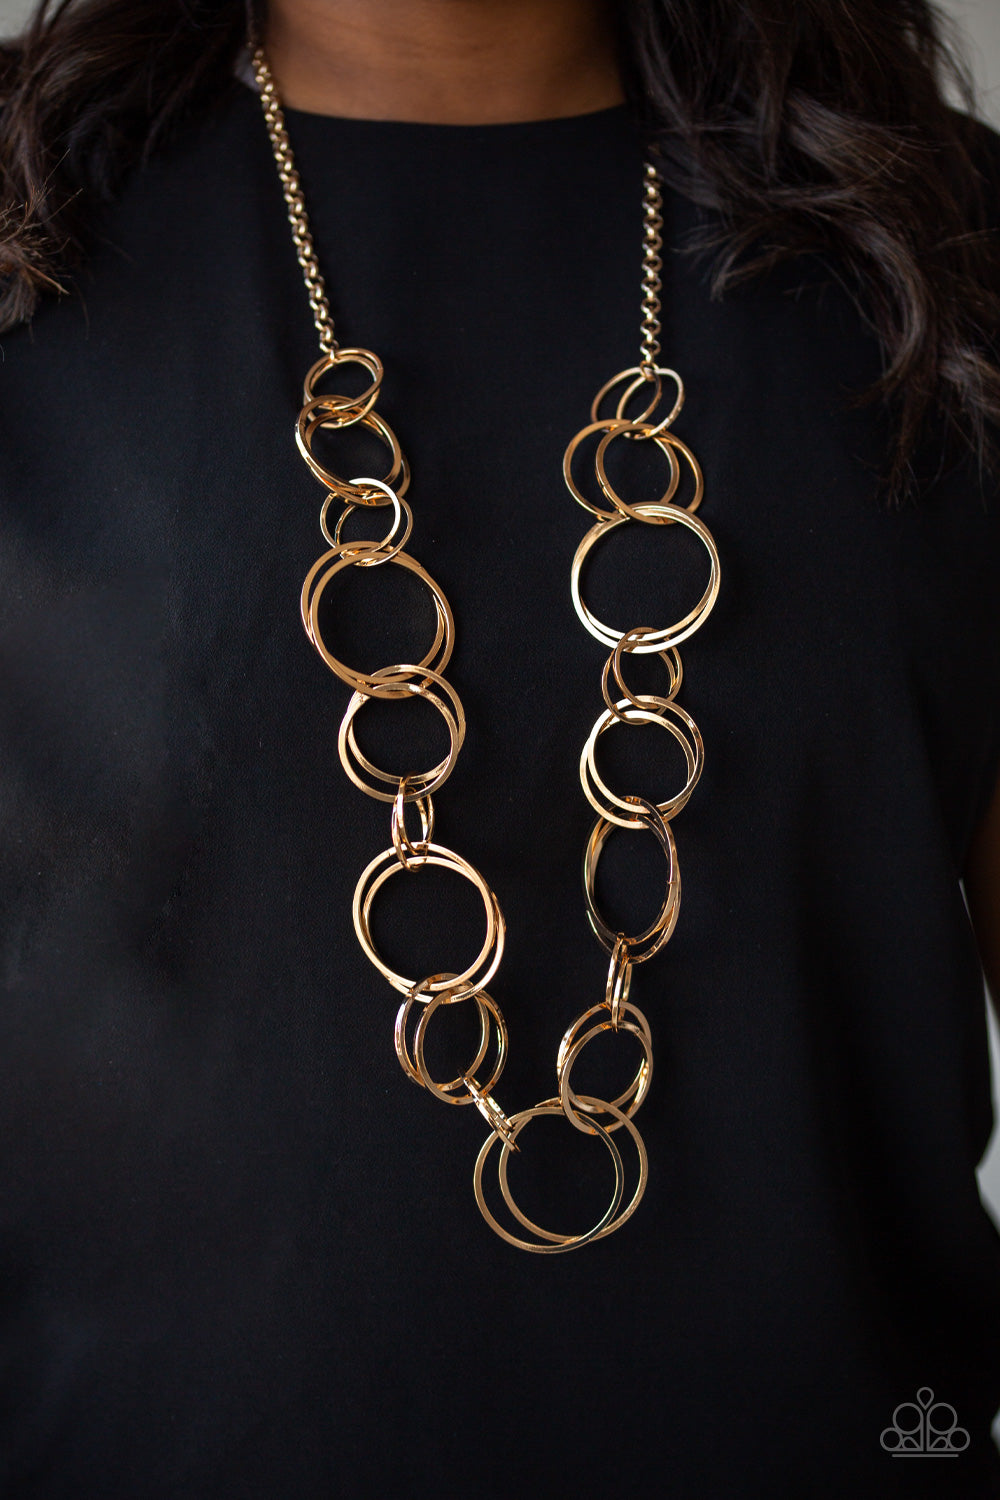 Paparazzi - Natural-Born RINGLEADER - Gold Ring Hoop Necklace - Paparazzi Accessories - Alies Bling Bar